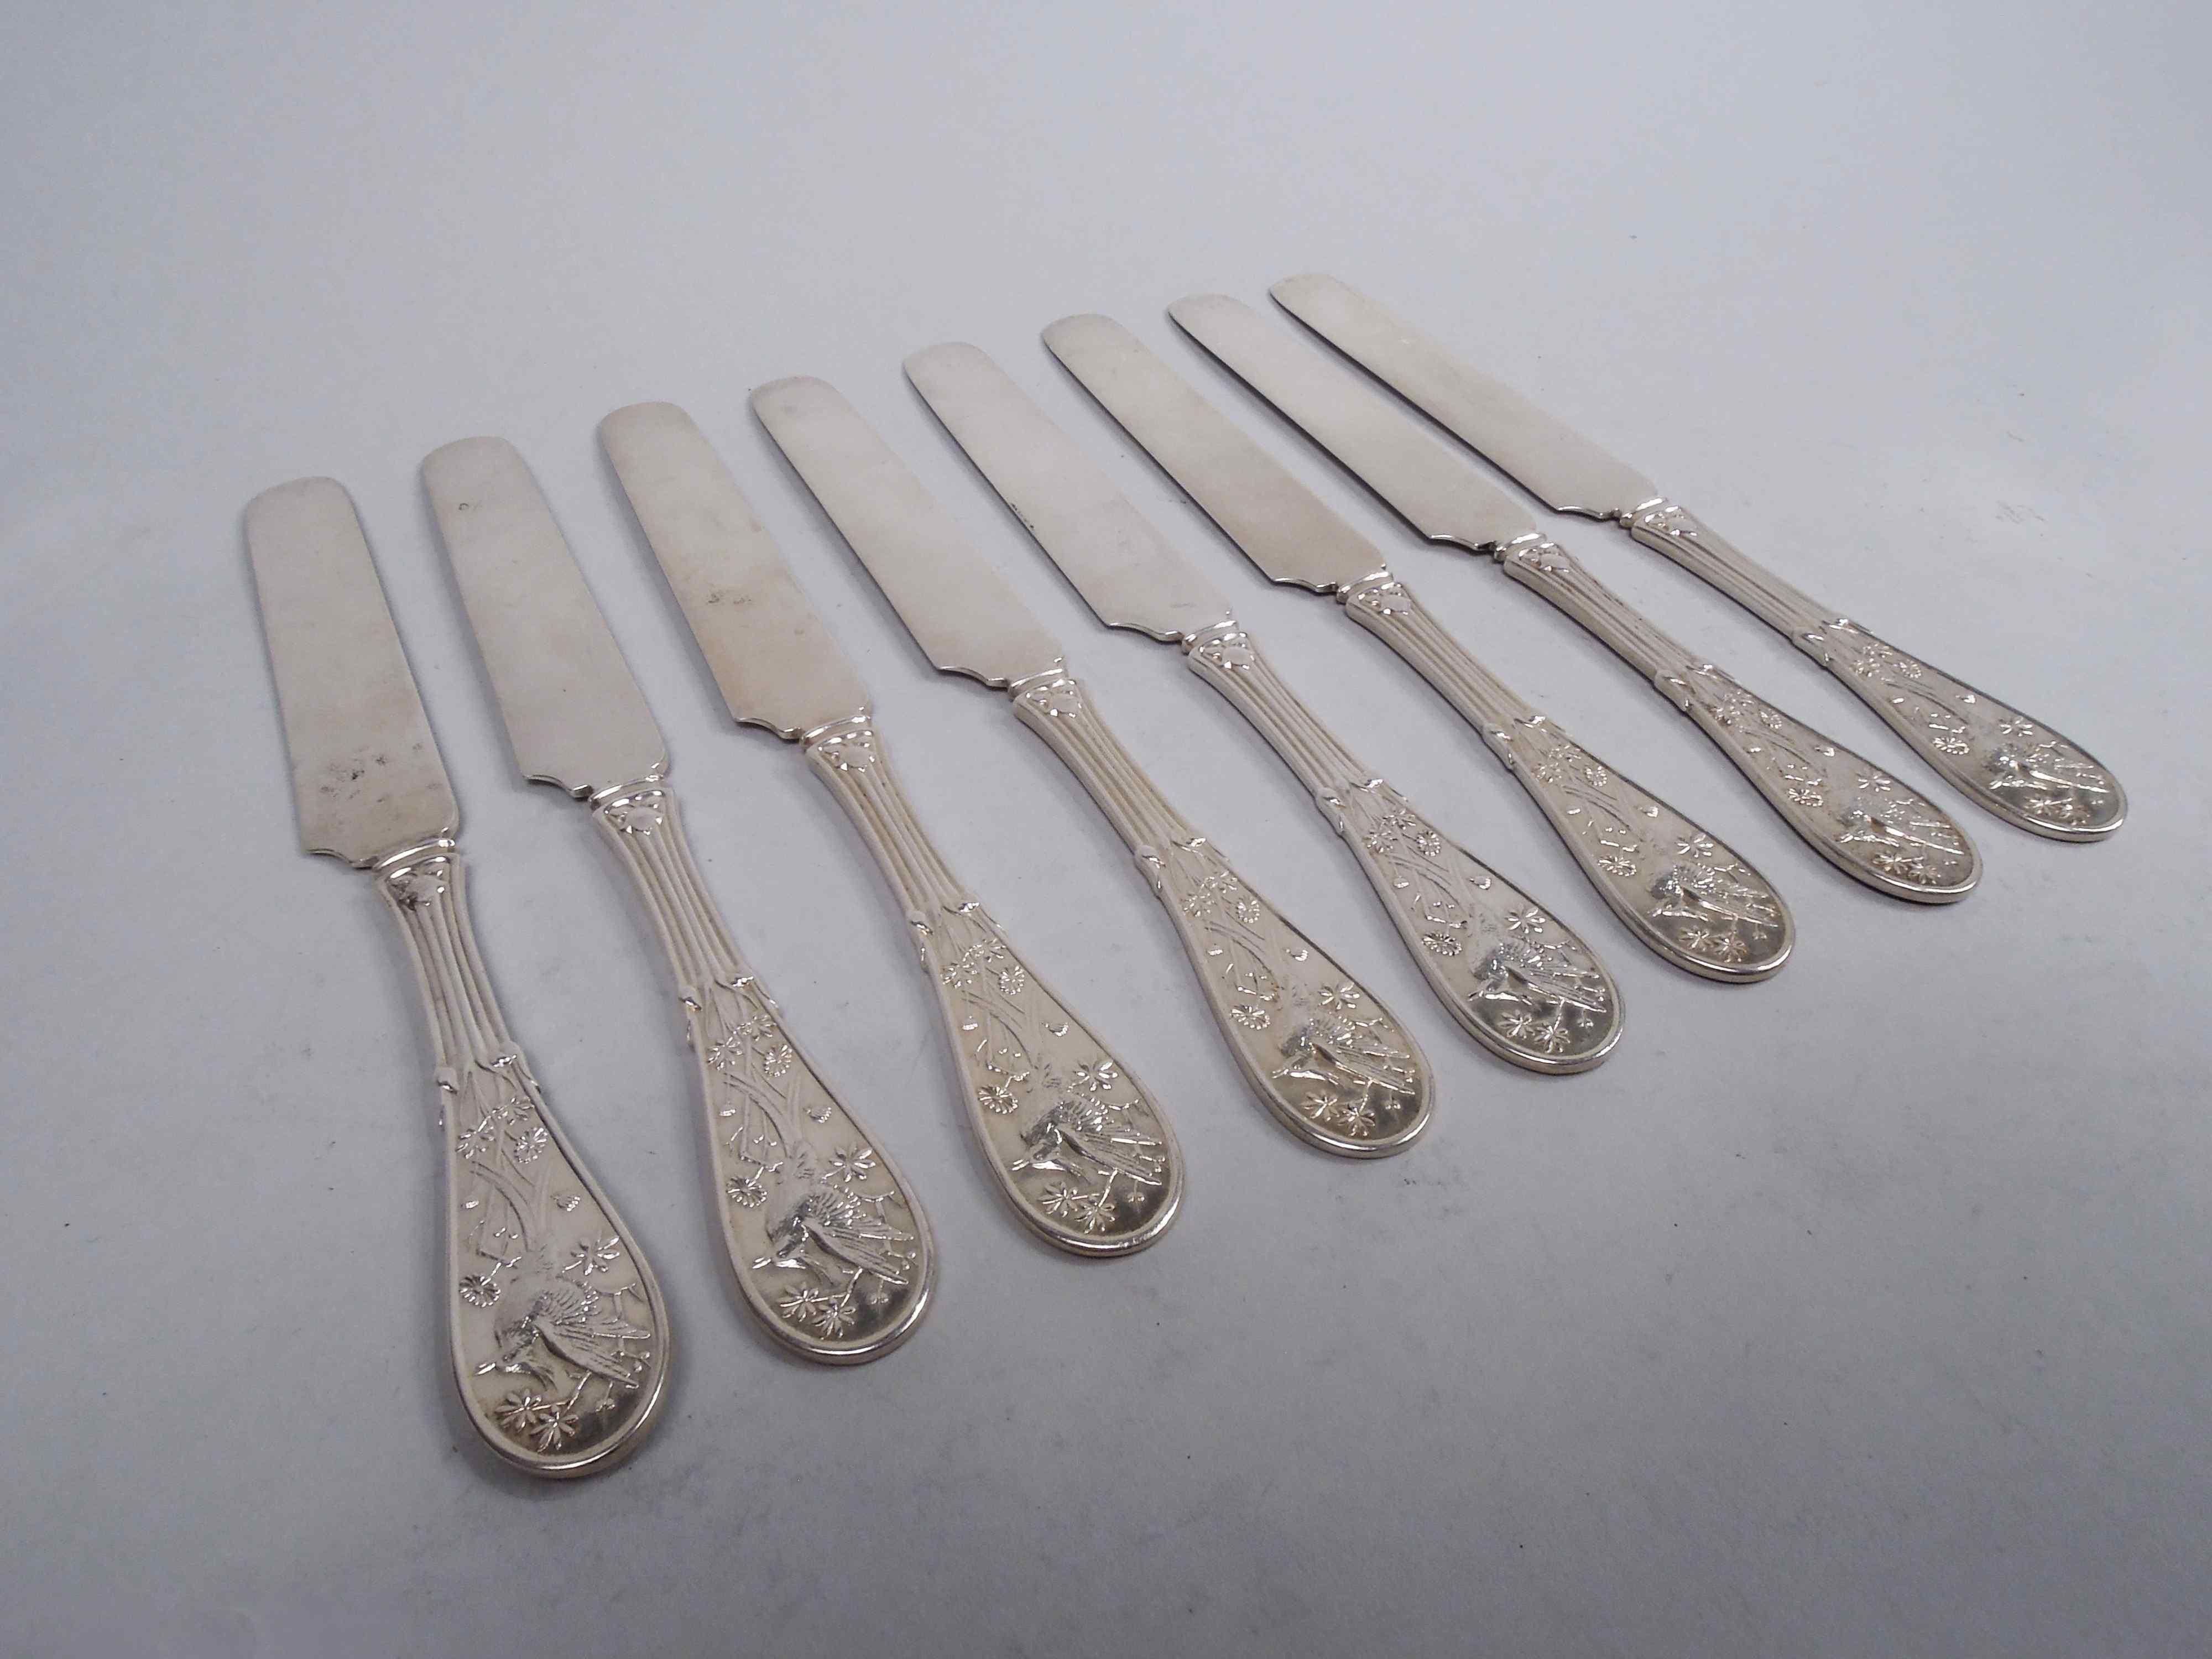 Set of 8 Japanese sterling silver breakfast knives. Made by Tiffany & Co. in New York, ca 1875. Reeded handle and oval terminal; double-sided low-relief stylized ornament with perched bird, flowers, leafing stalks, and cattails. The pattern was